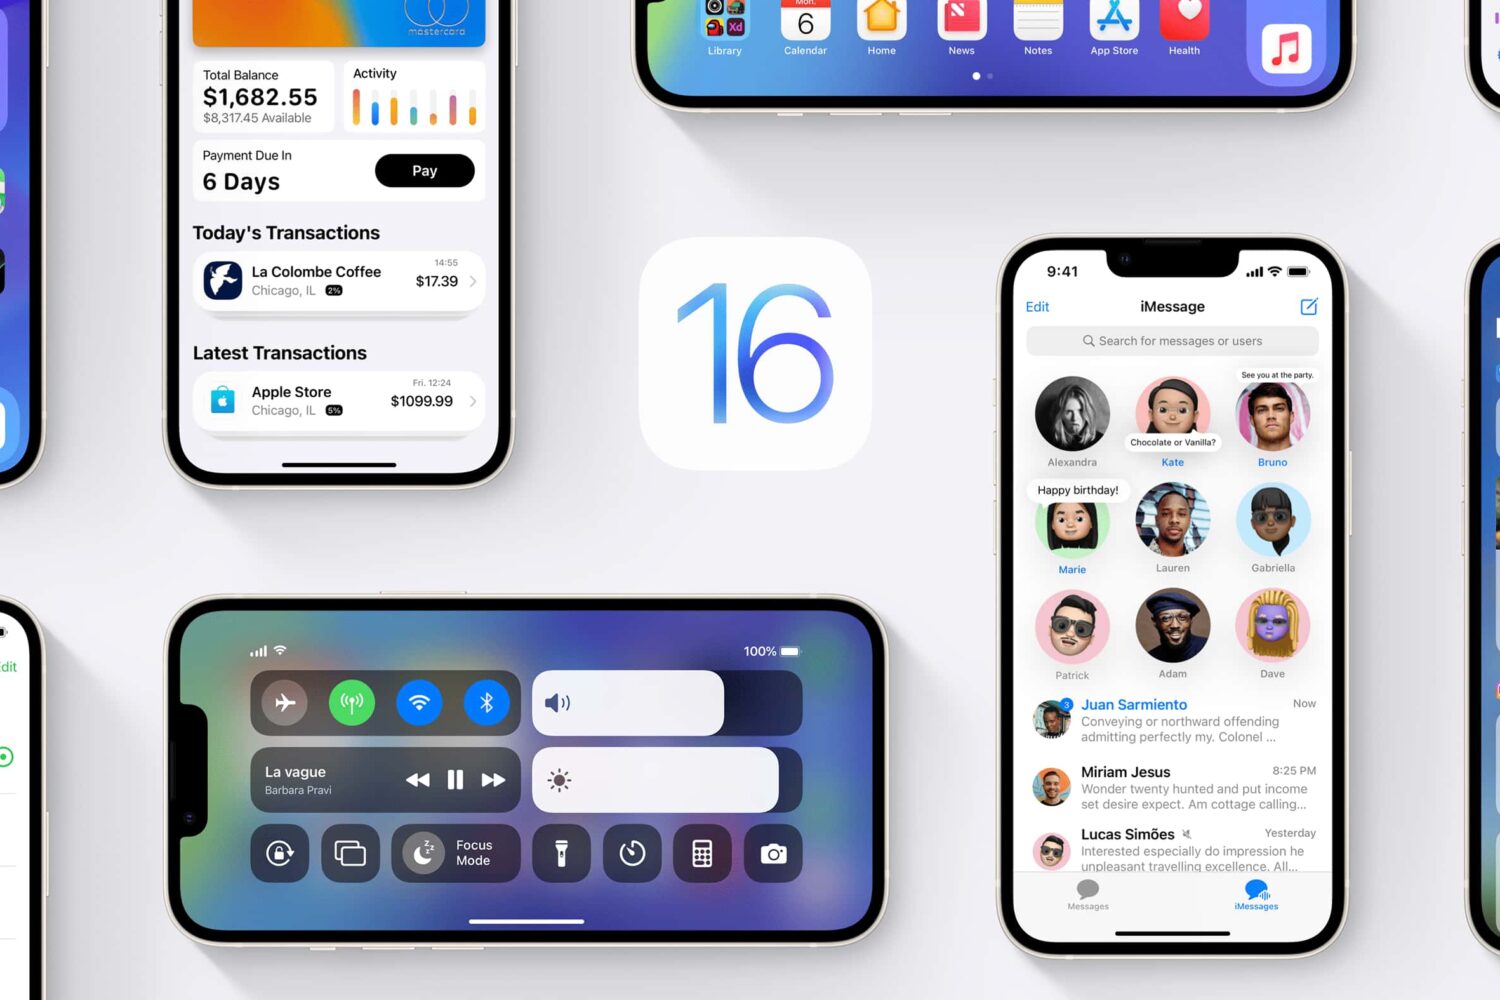 This iOS 16 concept depicts multiple iPhone device screenshots in portrait and landscape orientation showcasing imagined features